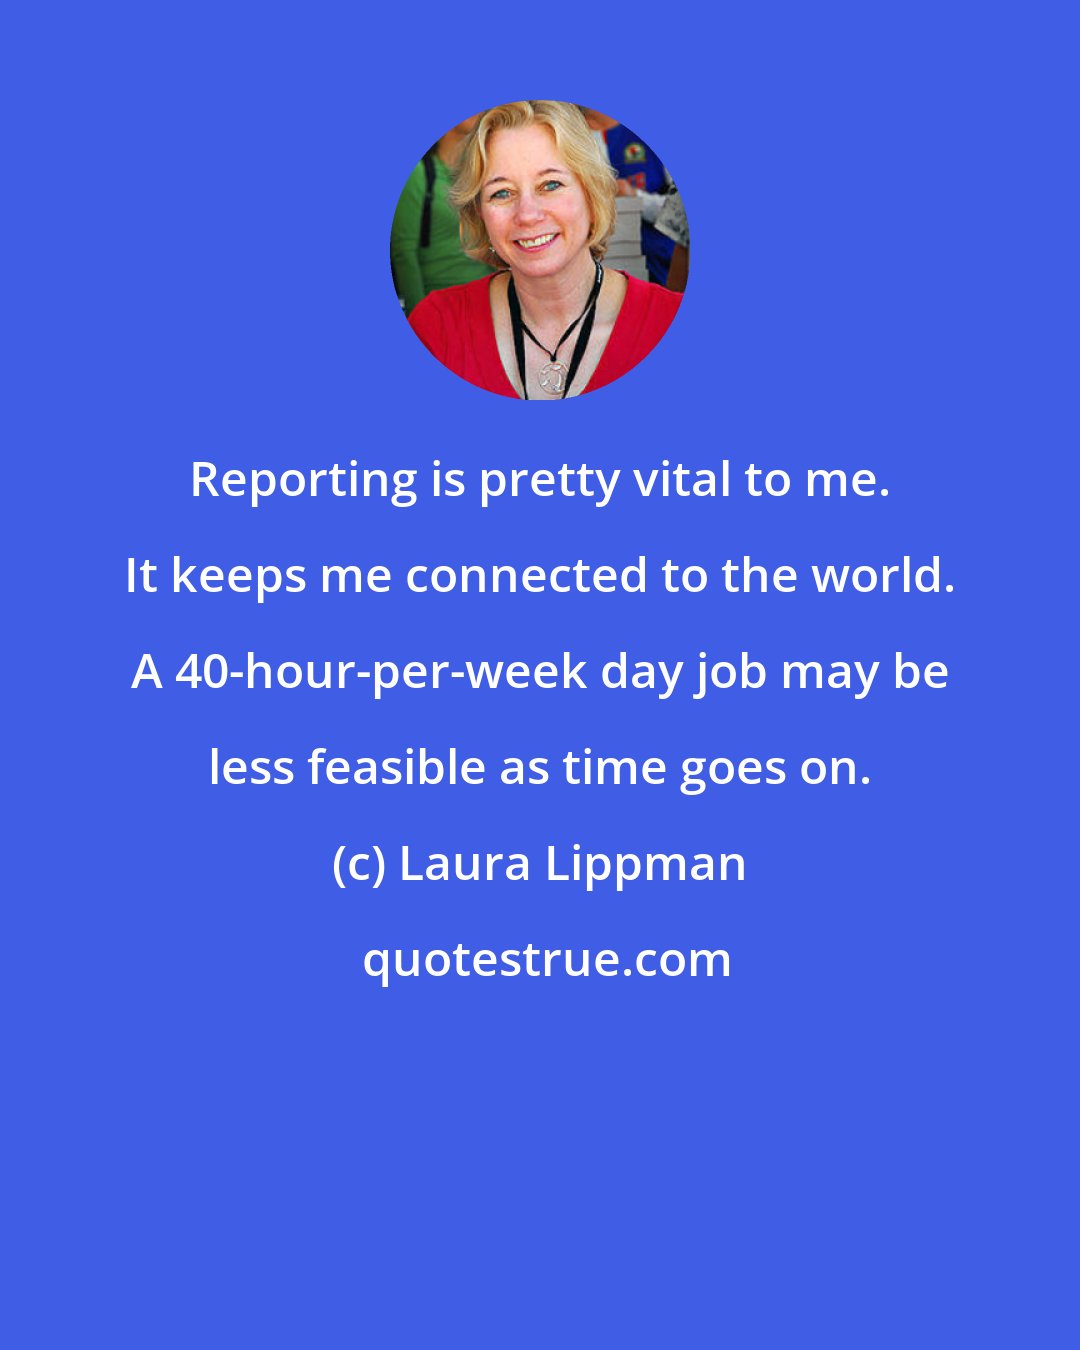 Laura Lippman: Reporting is pretty vital to me. It keeps me connected to the world. A 40-hour-per-week day job may be less feasible as time goes on.